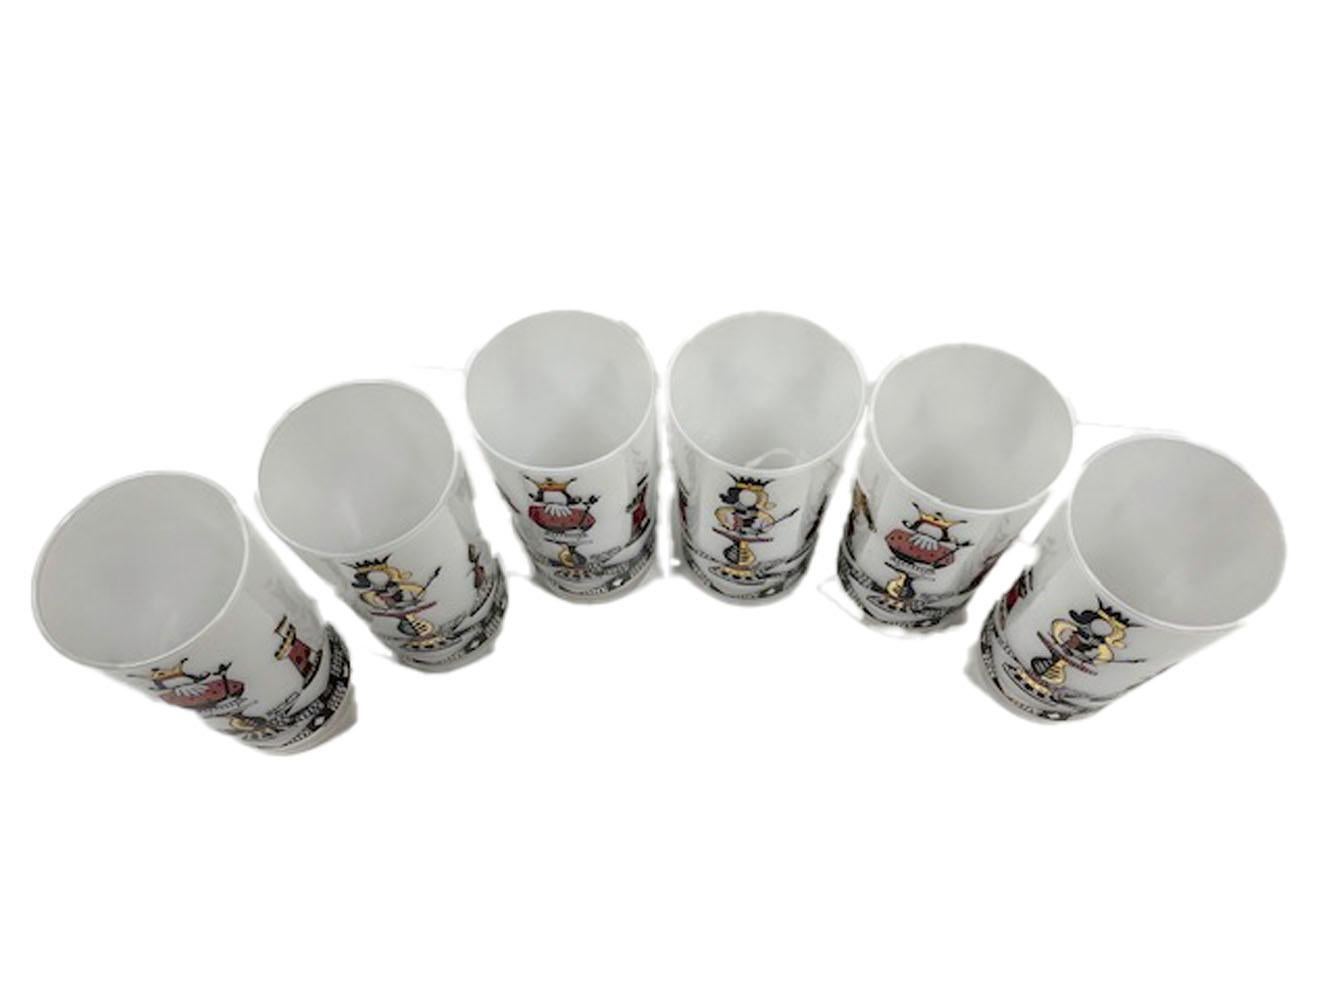 Set of 6 Georges Briard chess themed highball glasses - three king, three queen. Clear glass with white frosted interiors and exteriors decorated with chess pieces in black and red enamel with 22k gold.